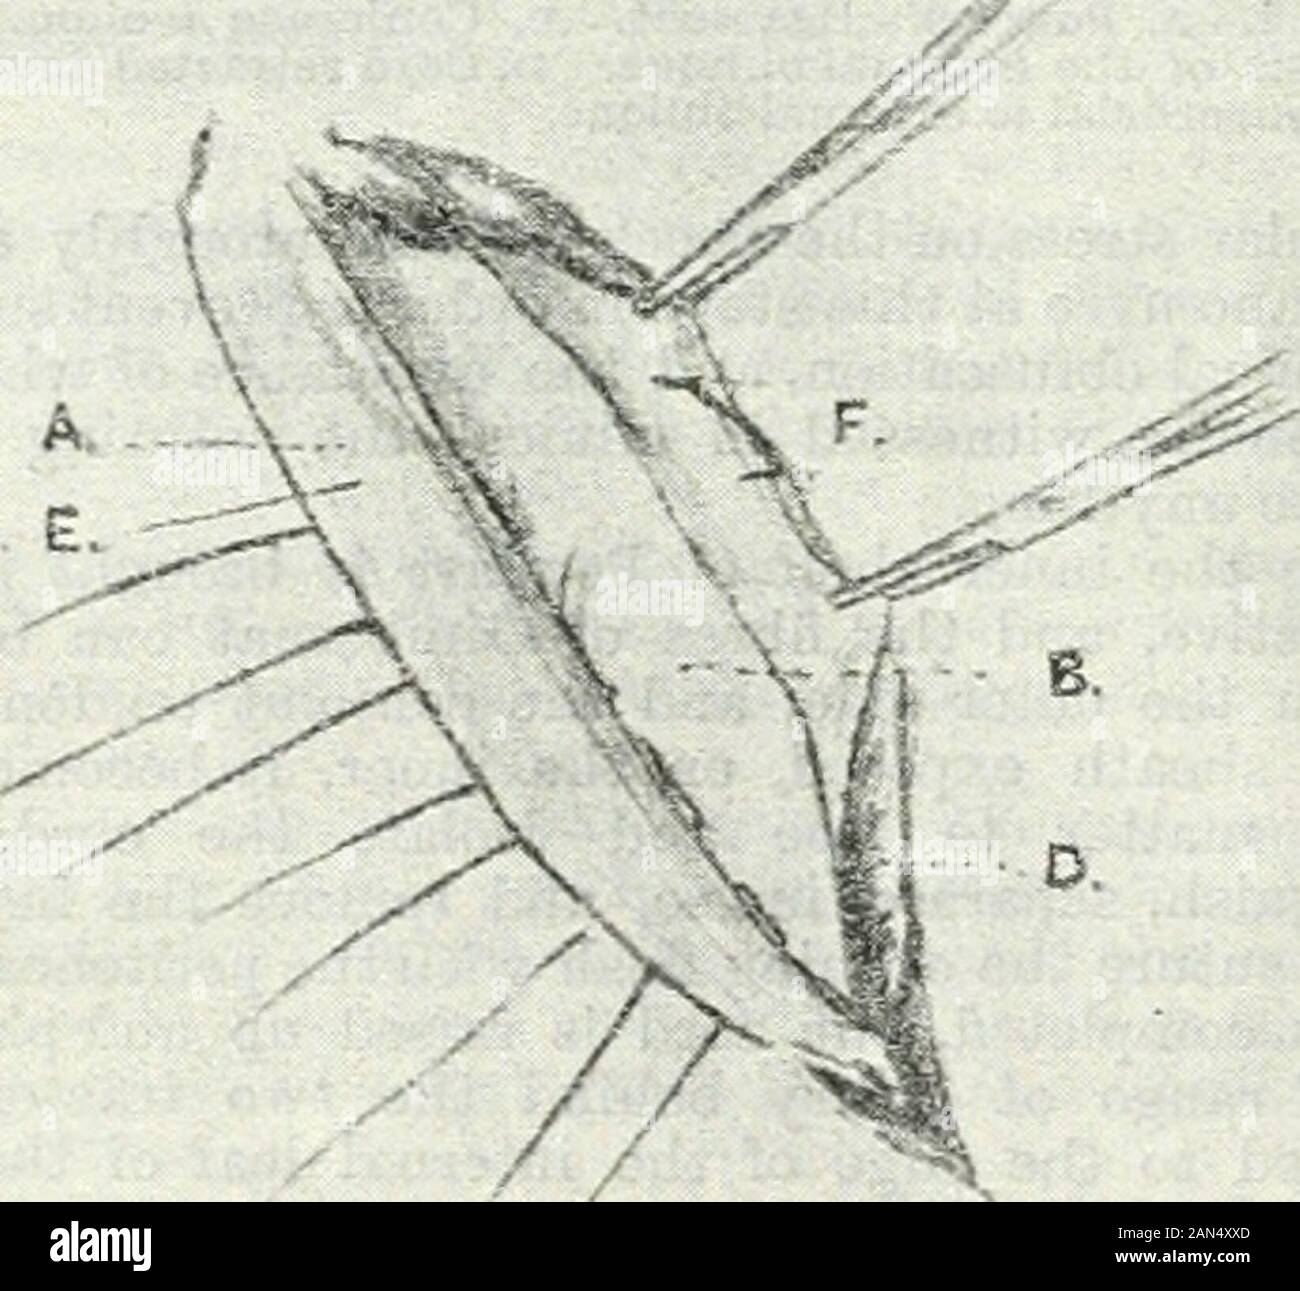 British medical journal . Via. 2.Insertion of first stiteli through Ciimheriiafs ligauieubaud coujoiued teuflon. A. Pouparts ligameut. n. Conjoined tendon.r&gt;, Covtl retracted inwar&lt;ls. E, Esterual oblique. lieruia needle further inwards through the adjoiningsheath of the rectus, so as to afford a good purchasefor the loop of the mattress suture. Finally, the two aponeurotic leaves arc united by acontinuous catgut suture, and in doing this I make it aXule to insert the point of the needle deep enough to catclihold of underljing muscle in order that no intermusculardead space may be left. Stock Photo